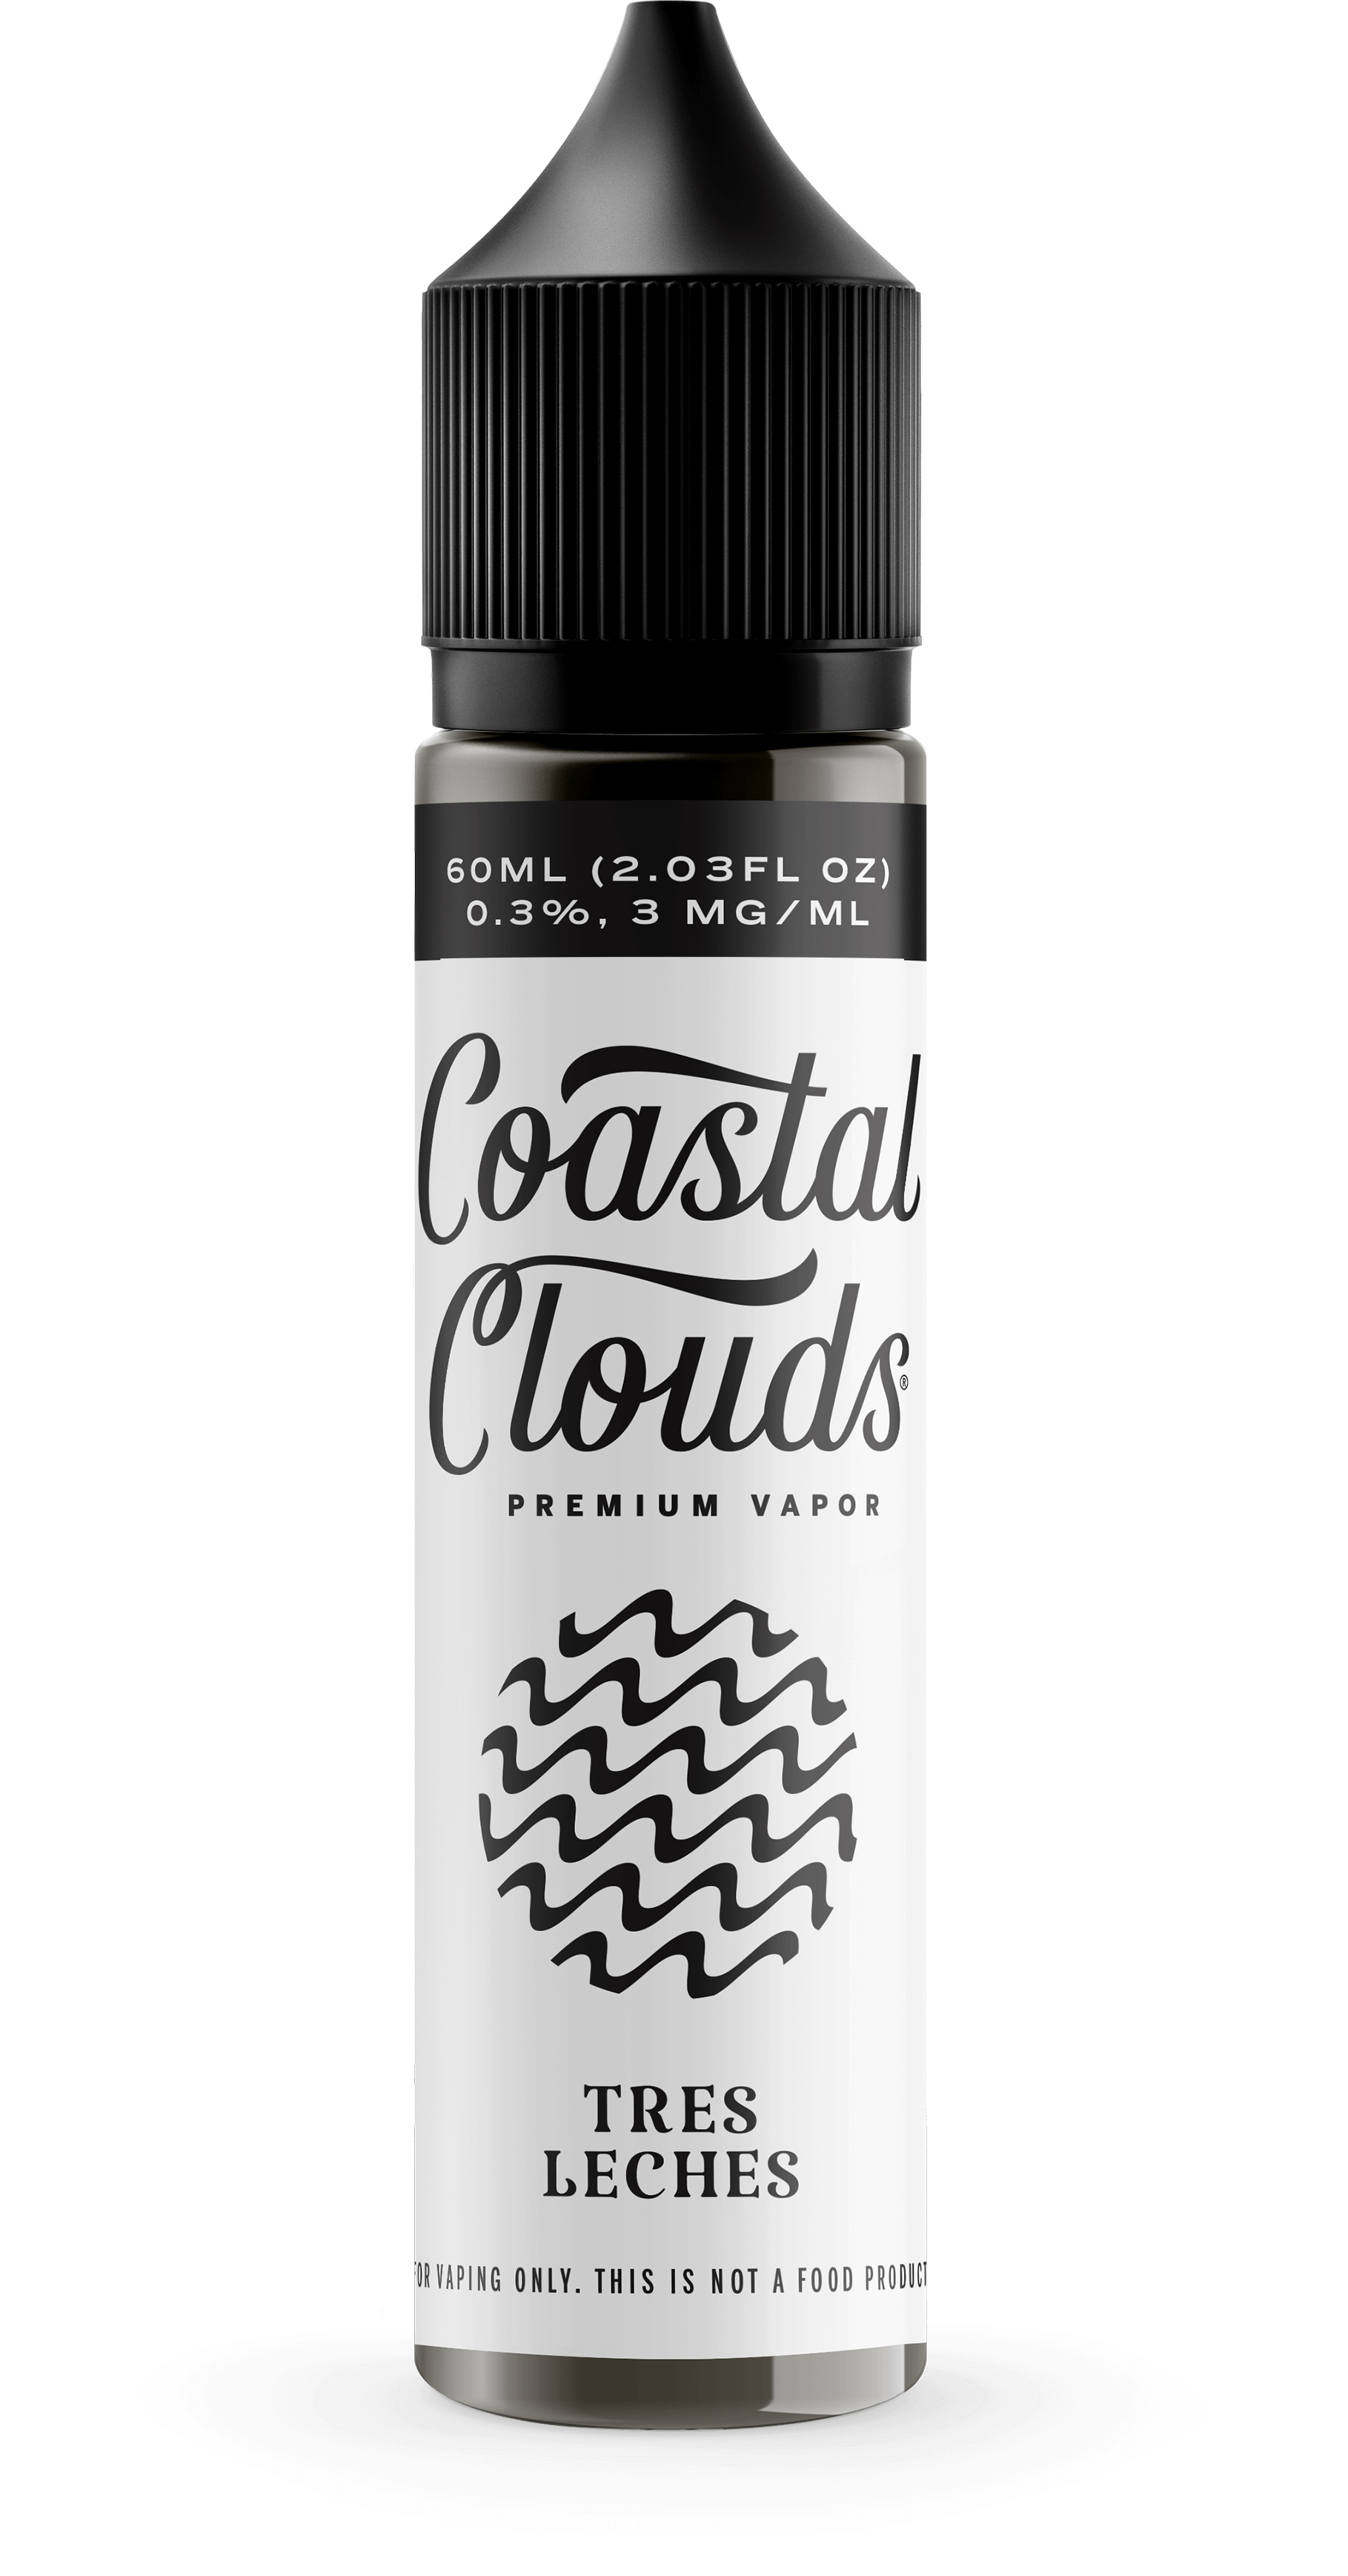 Tres Leches by Coastal Clouds Series 60mL bottle